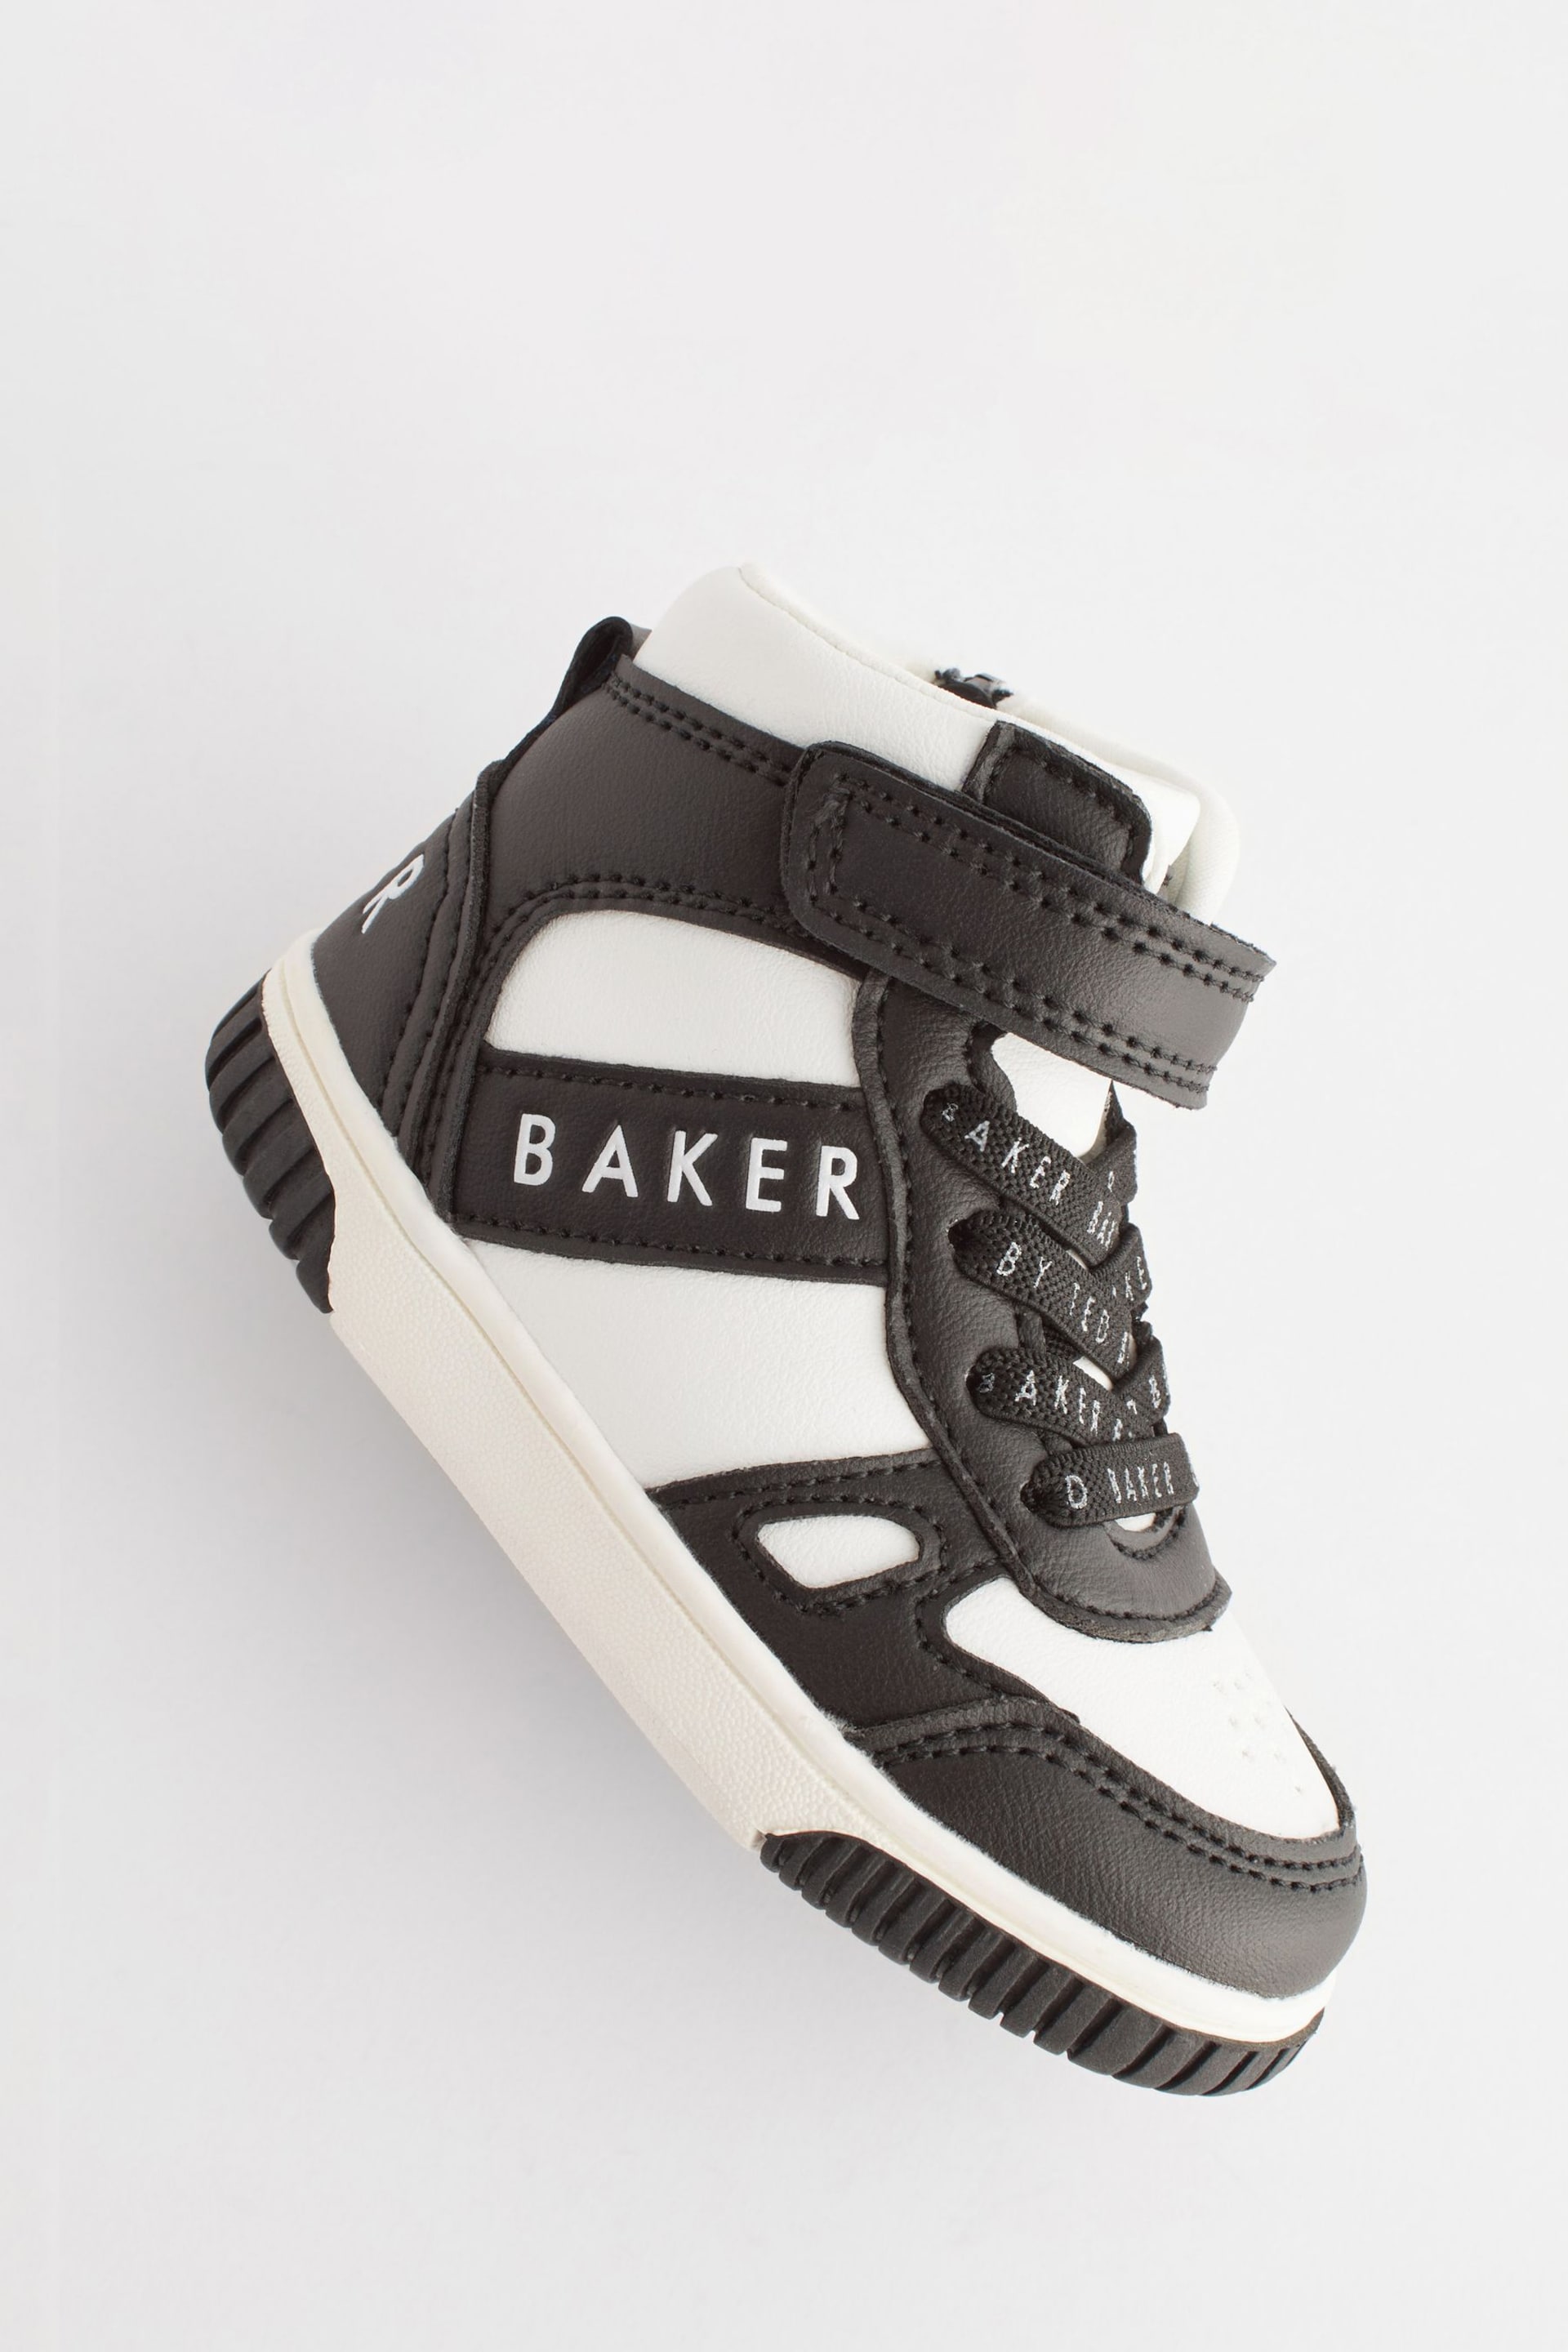 Baker by Ted Baker Boys Black Hi-Top Trainers - Image 3 of 6